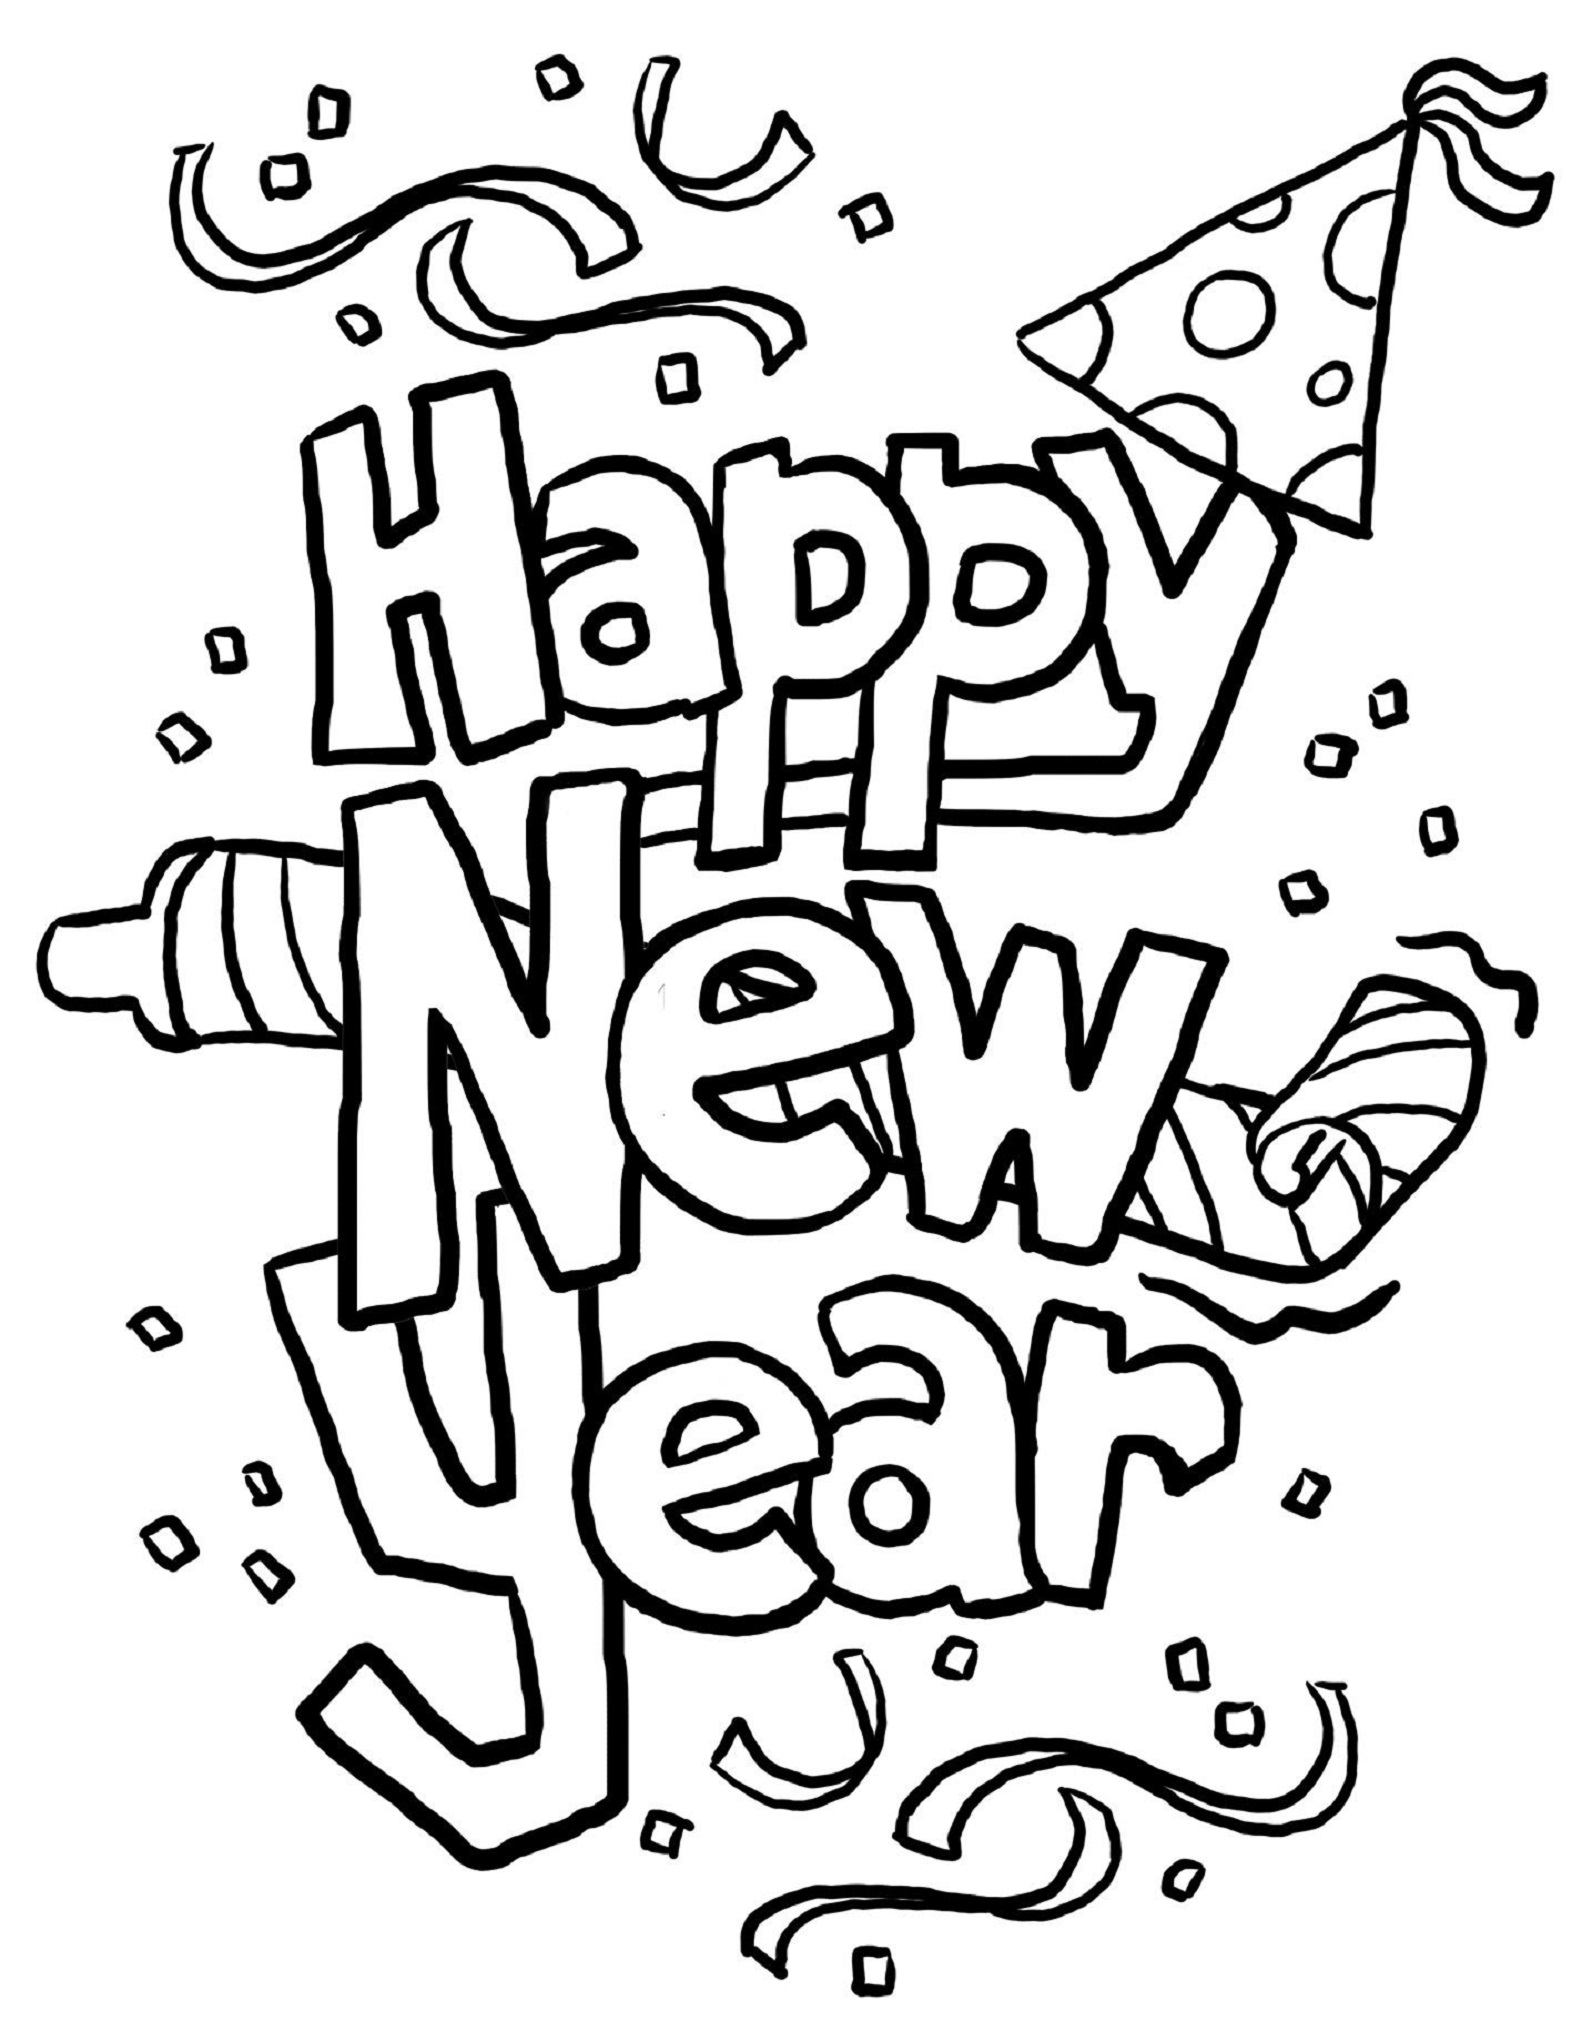 Printable New Year   4 live.com Coloring Page for kids.